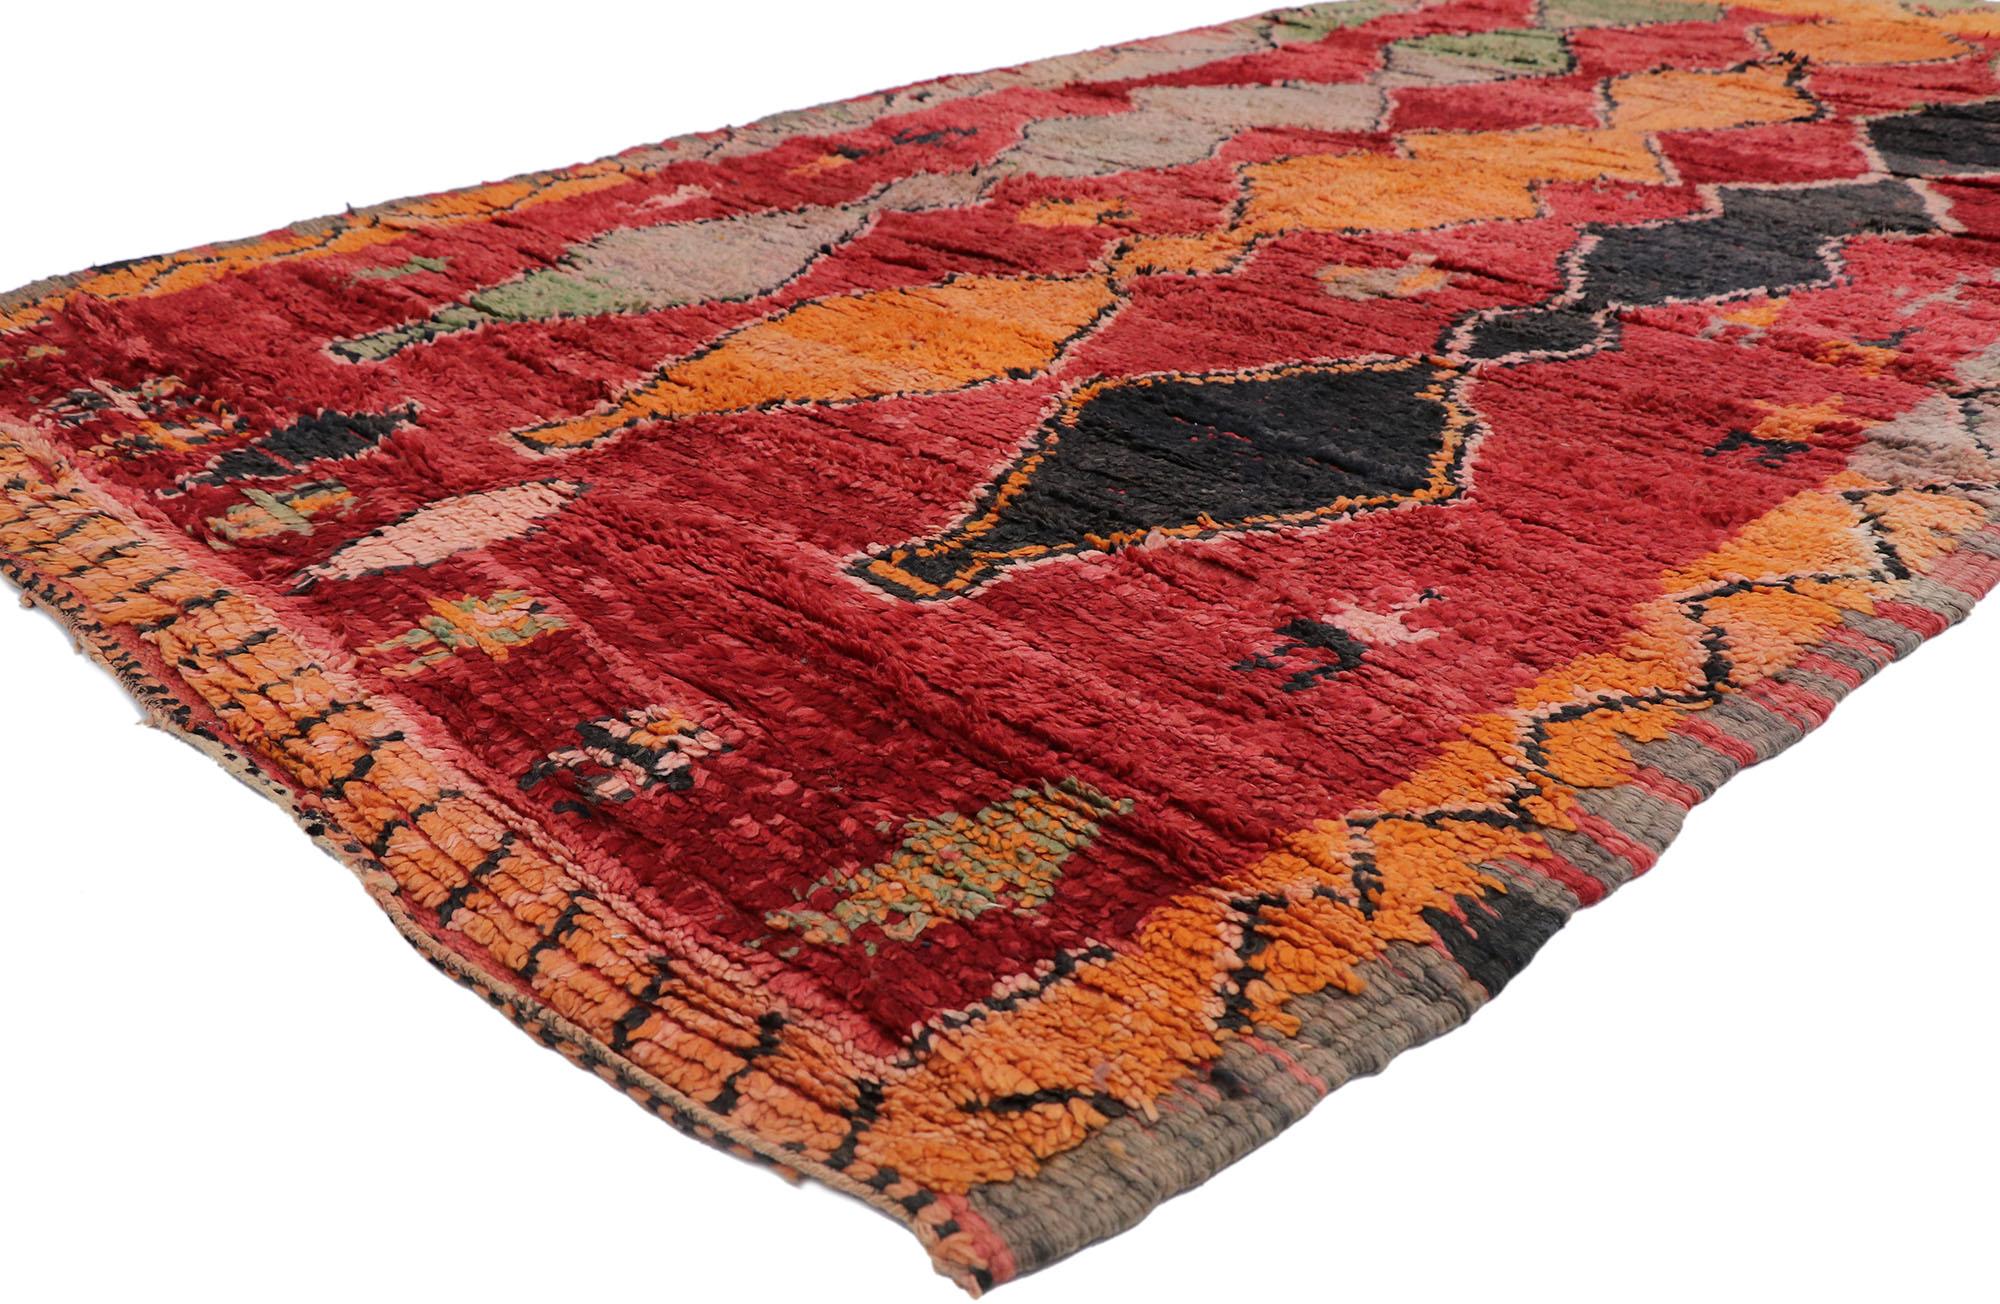 21306 Vintage Berber Moroccan Rug, 06'00 x 10'02.
Cozy nomad meets Maximalist style in this hand knotted vintage Moroccan rug. The intrinsic tribal design and lively colorway woven into this piece work together creating a cultured and curated